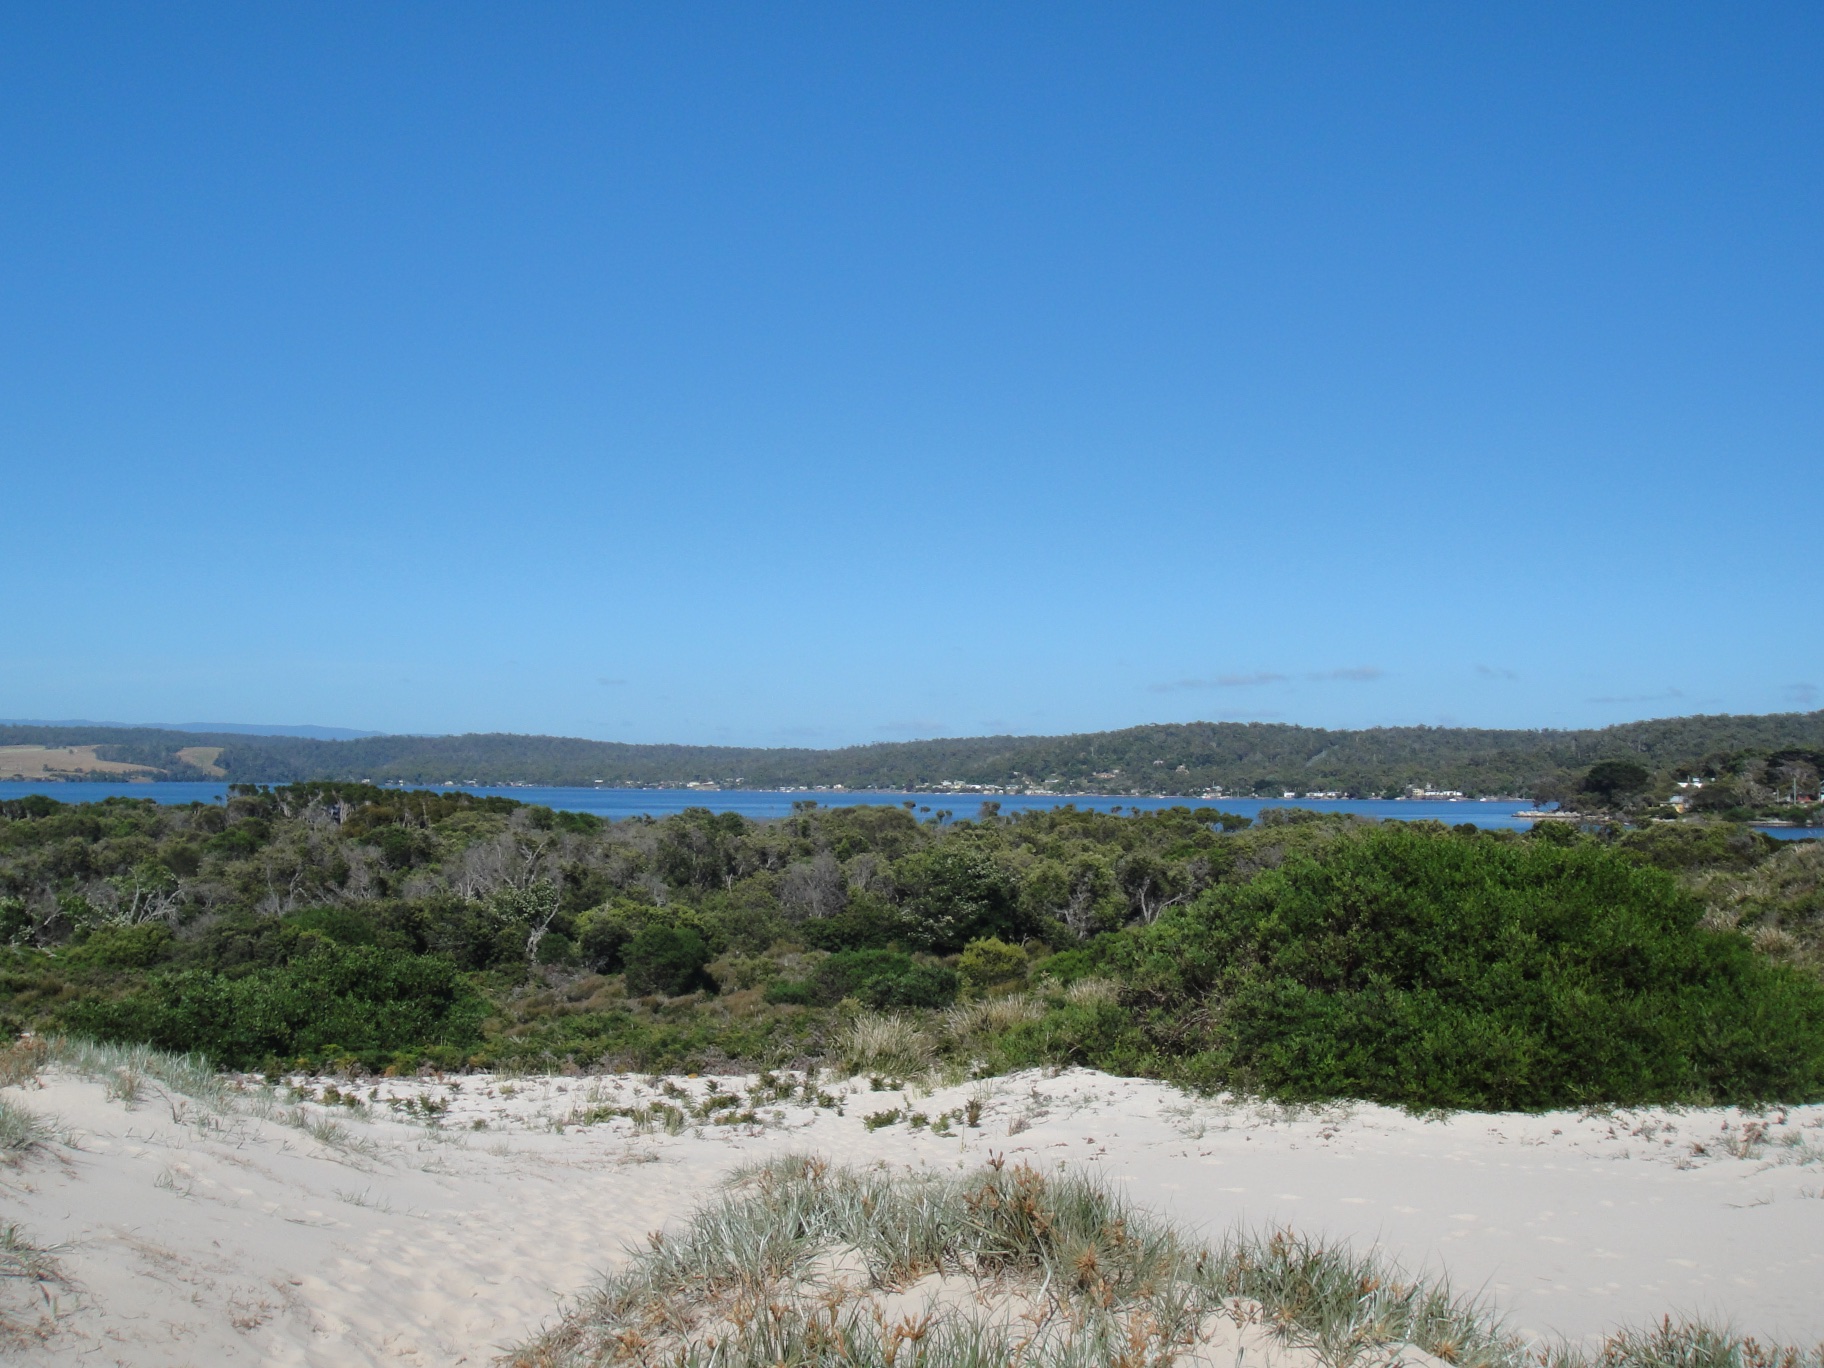 Anson's Bay from Pyramid Hill, Bay of Fires